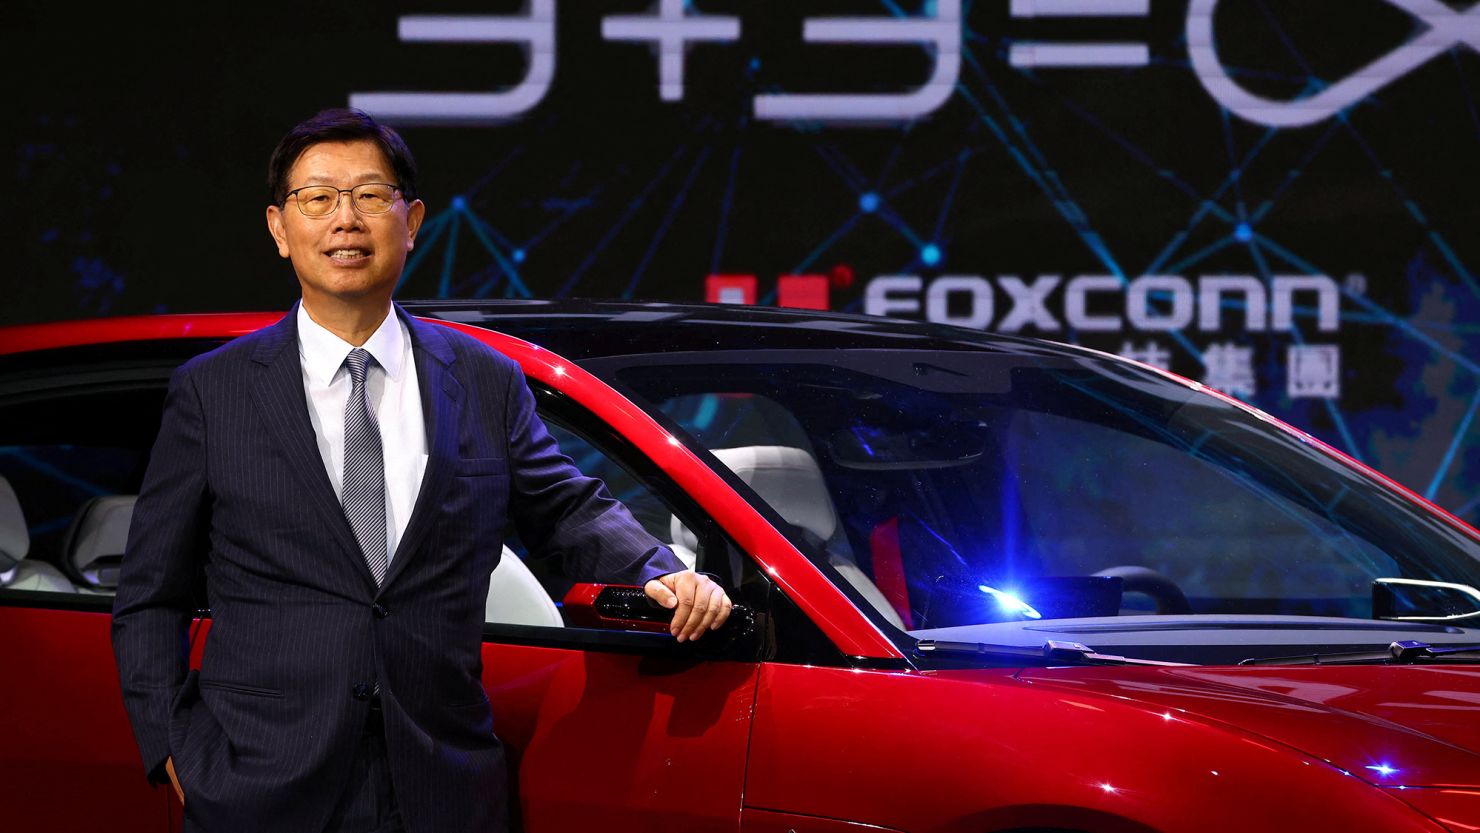 Foxconn Chairman Young Liu poses on stage with an electric vehicle, the Model C, during the company's annual Tech Day in Taipei, Taiwan, on October 18, 2022.